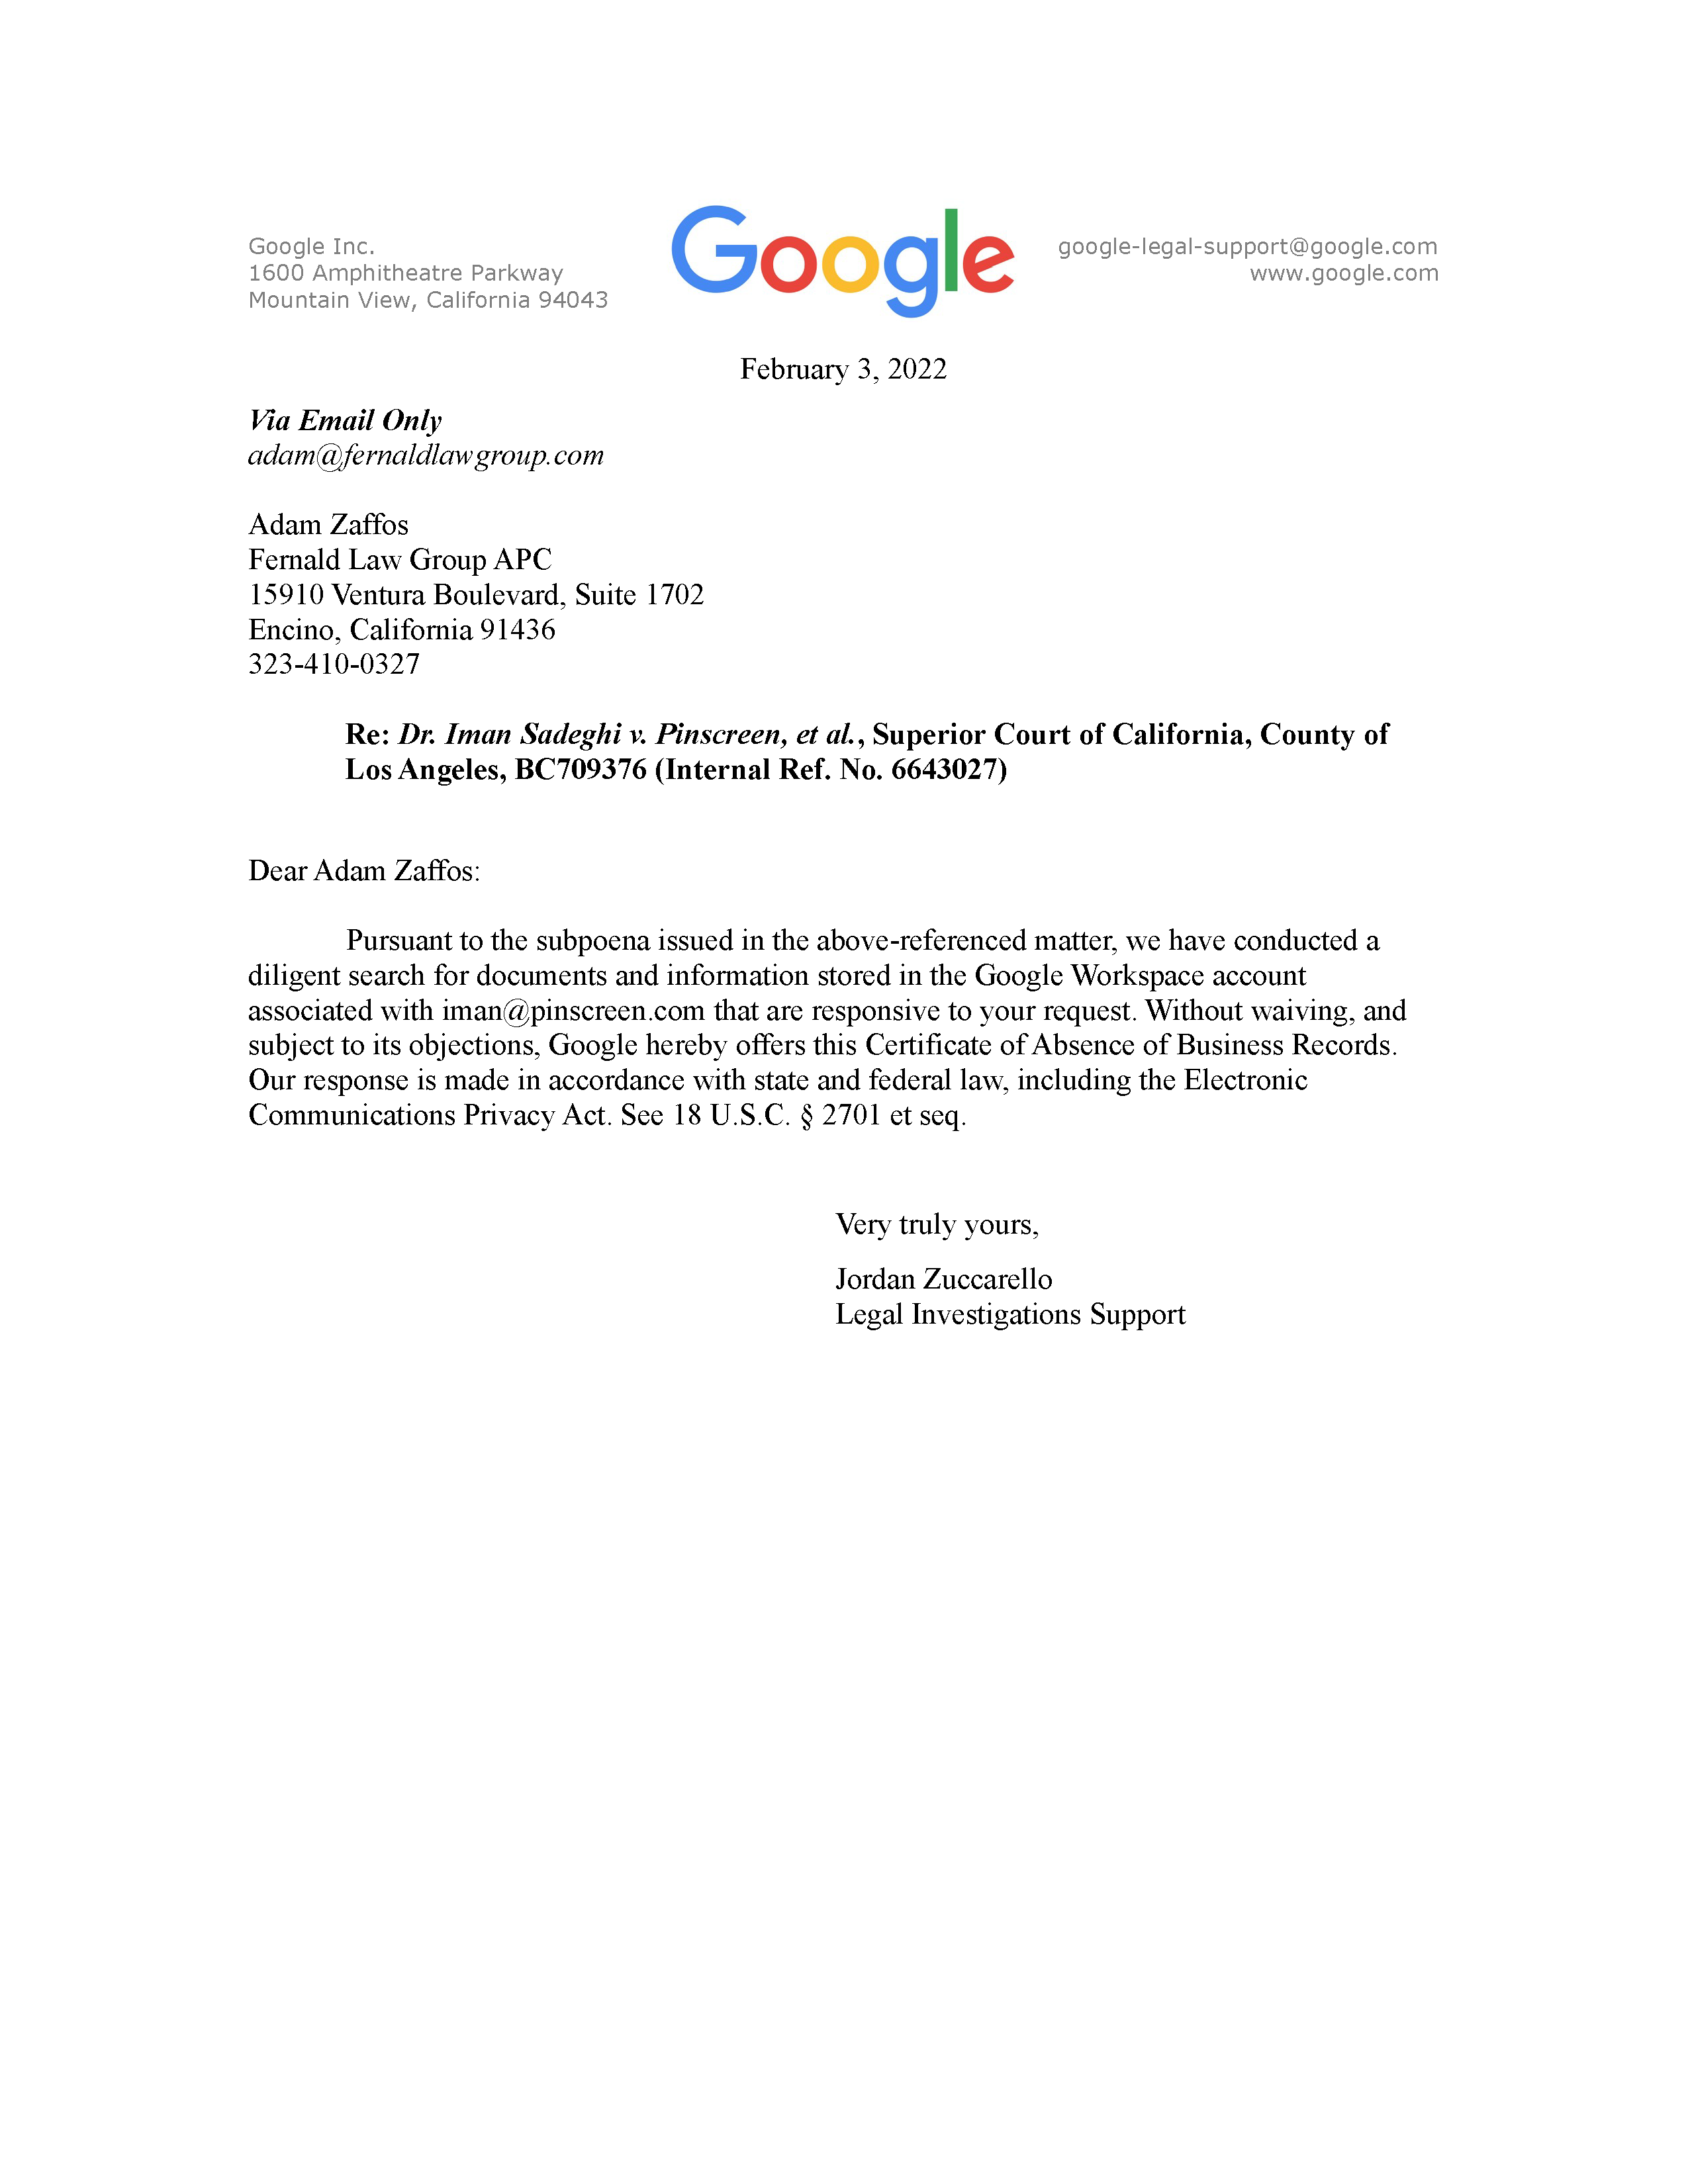 Google's Certificate of No Records re Pinscreen's Destruction of Evidence Page 1